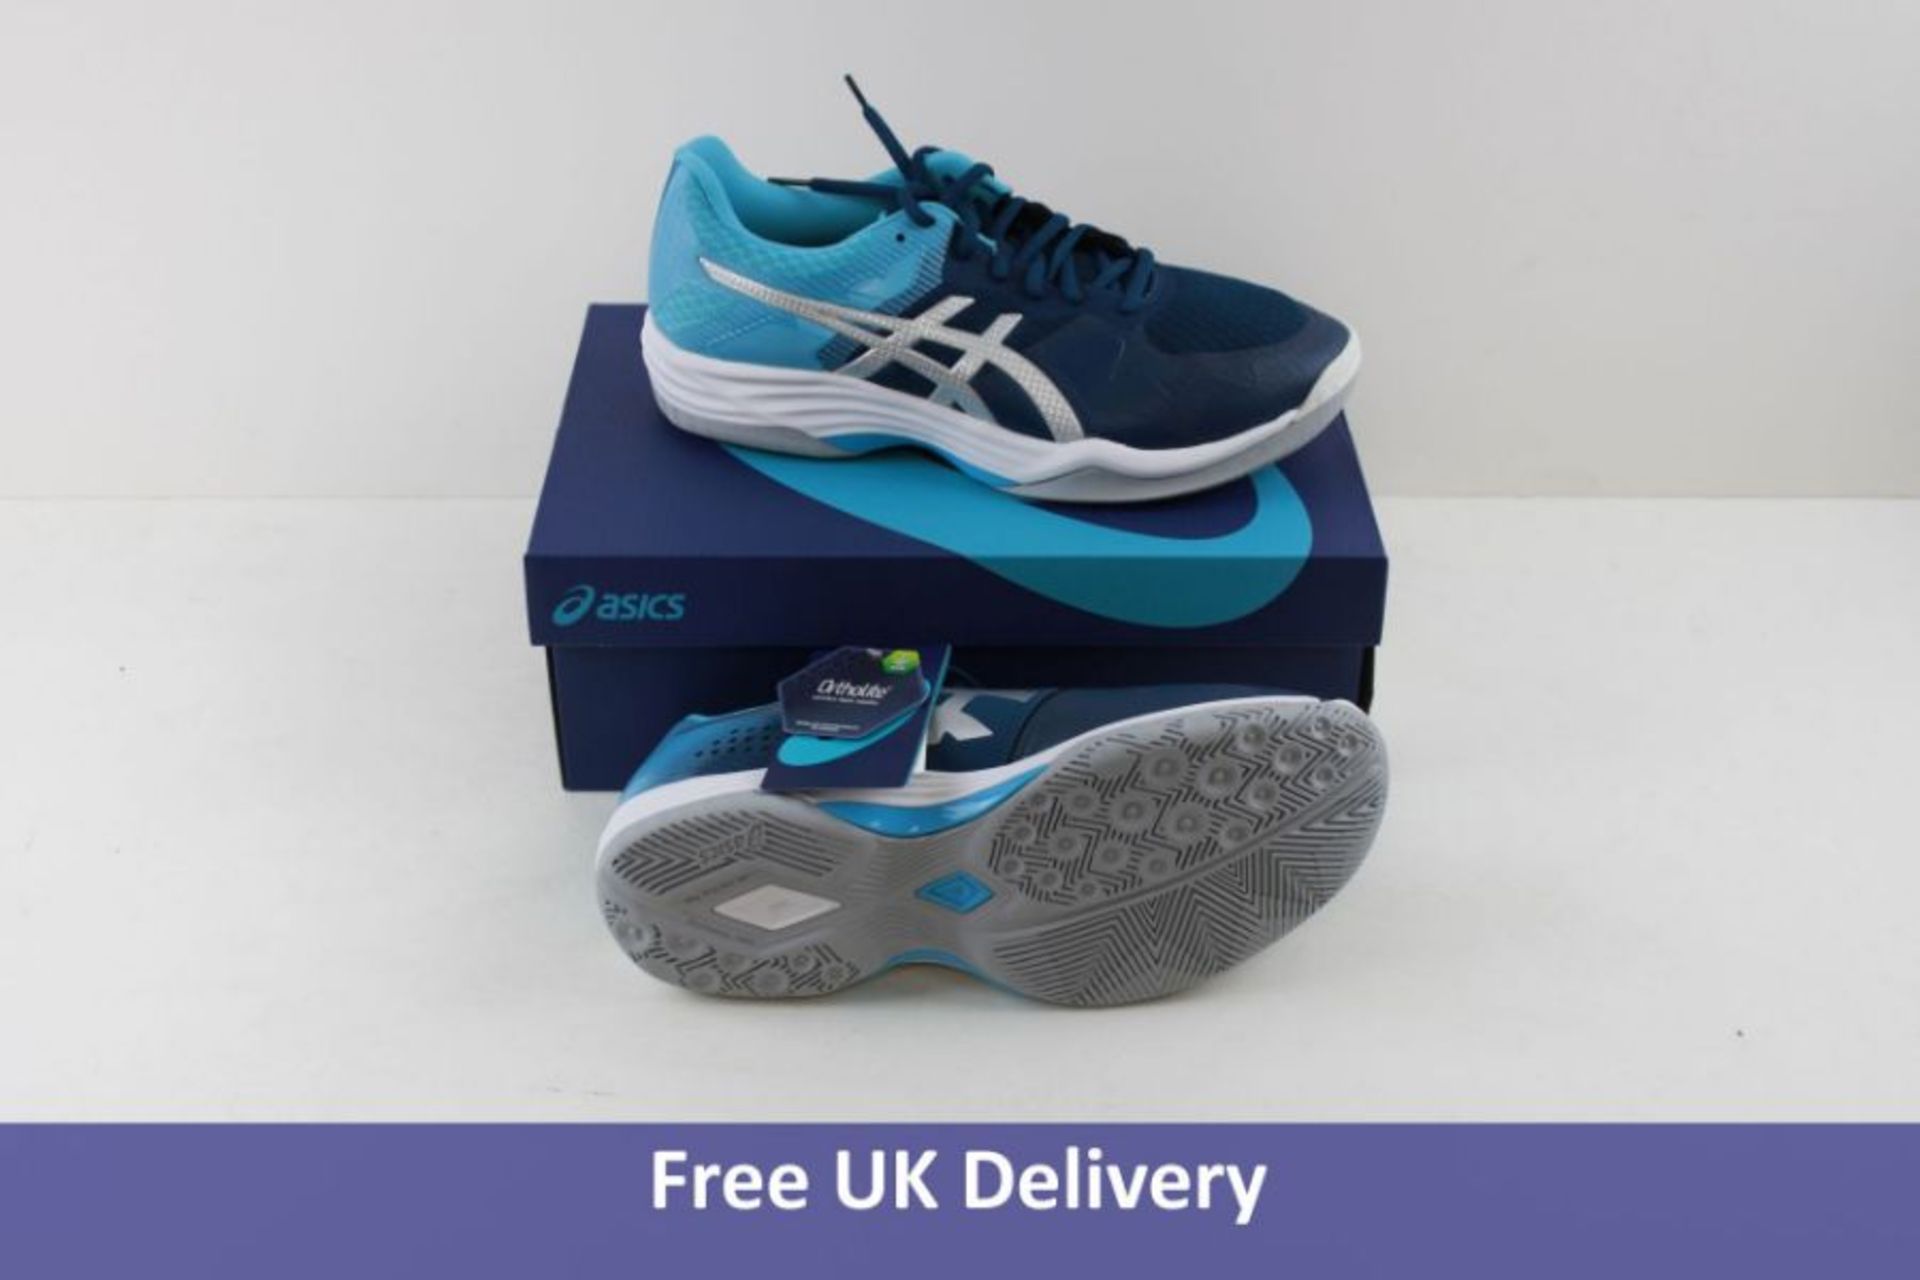 Asics Men's Gel-Tactic Trainers, Mako Blue and Pure Silver, UK 8.5